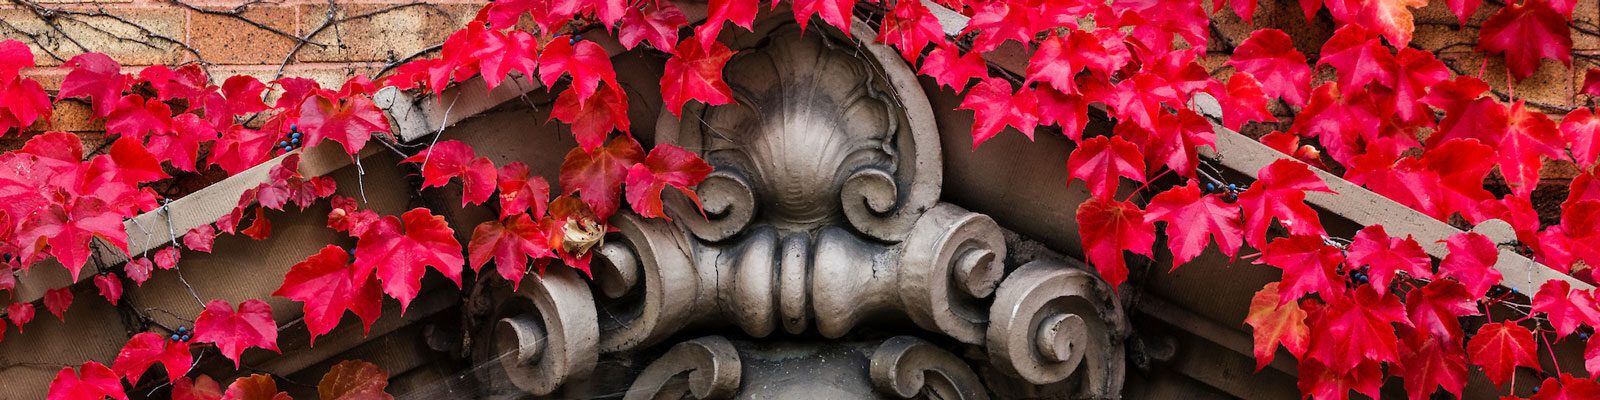 Red and fall-colored leaves of climbing ivy wrap around an ornate architectural detail on the exterior of a UW campus building